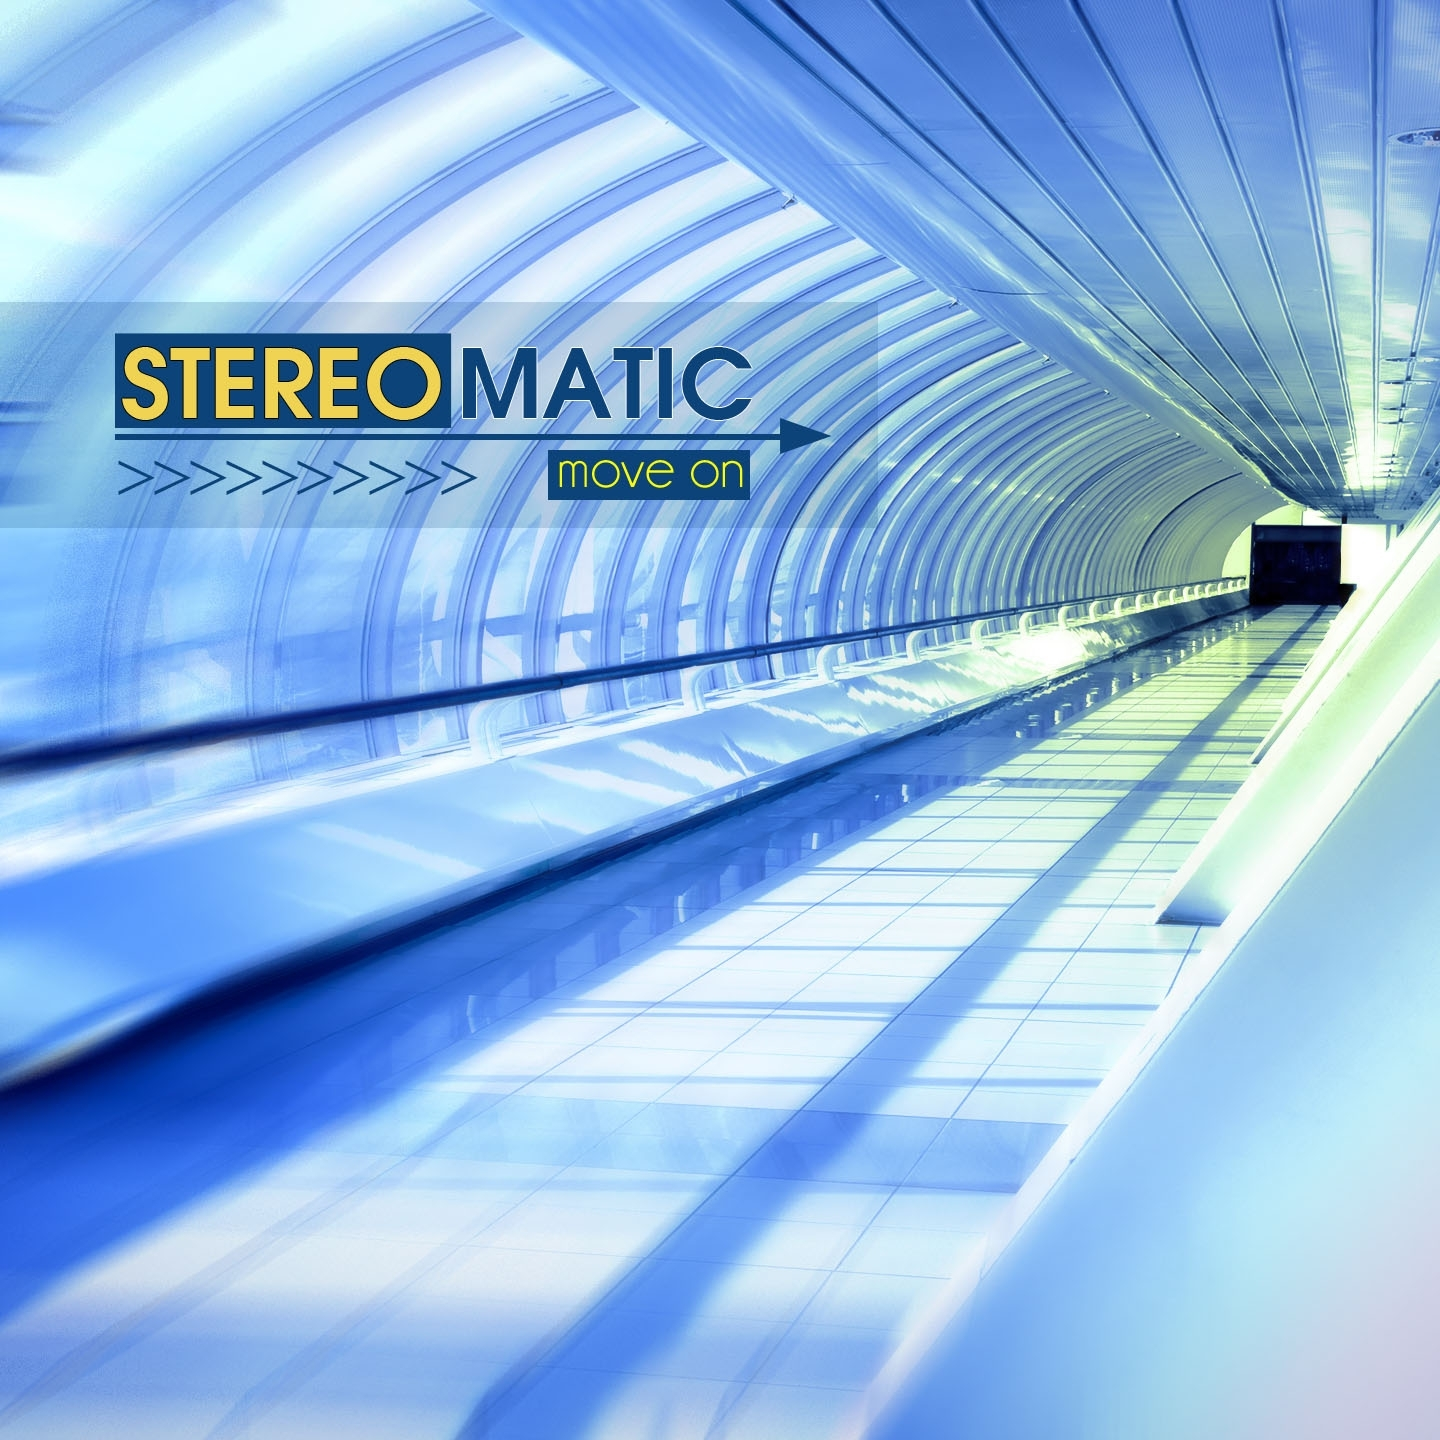 Move on. Stereomatic. On the move. Stereomatic just in time. Move (move on up).